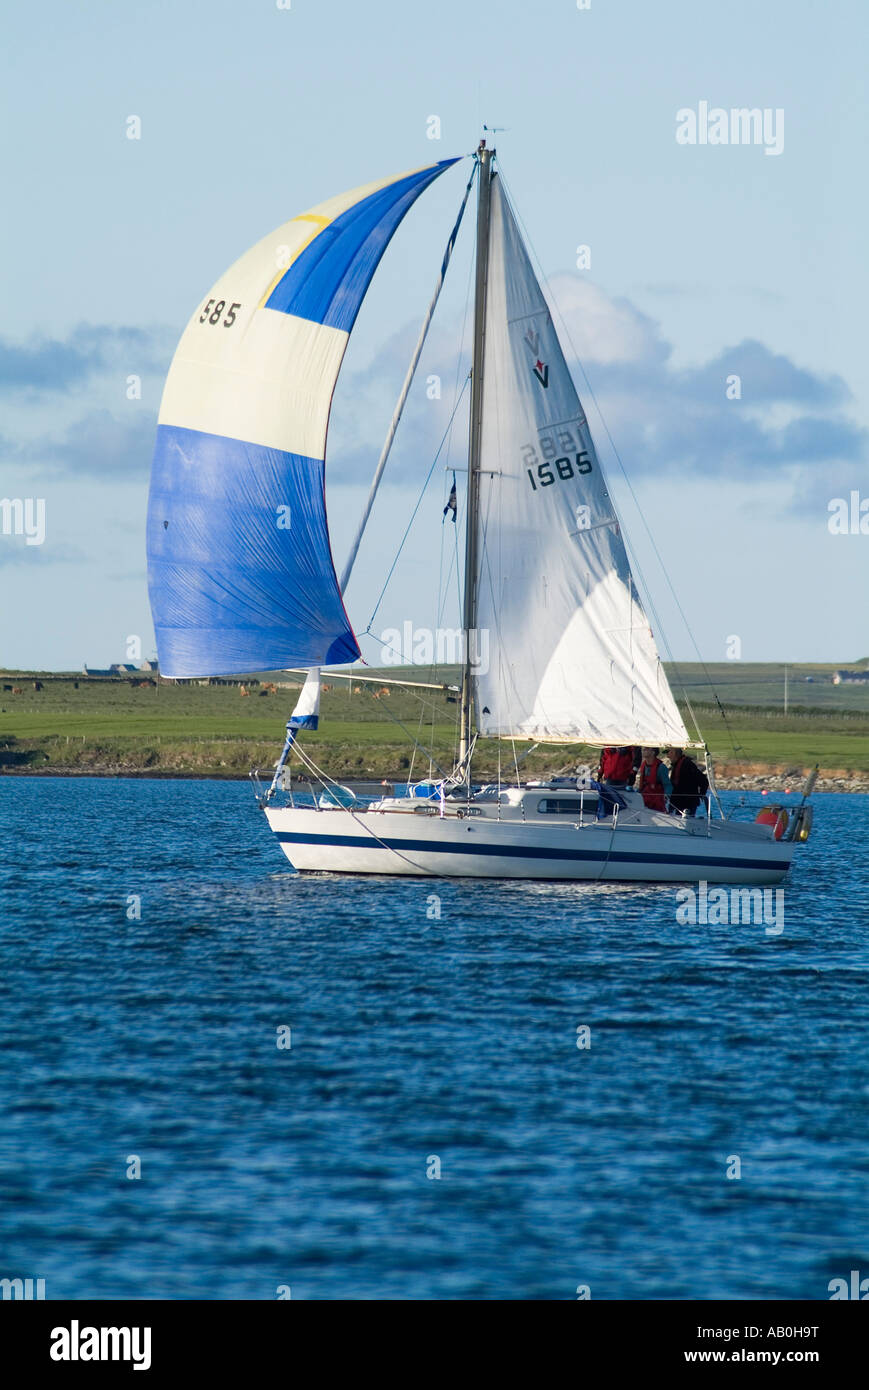 dh  KIRKWALL ORKNEY White and blue sail sailing club yacht in Kirkwall Bay cruising boat Stock Photo